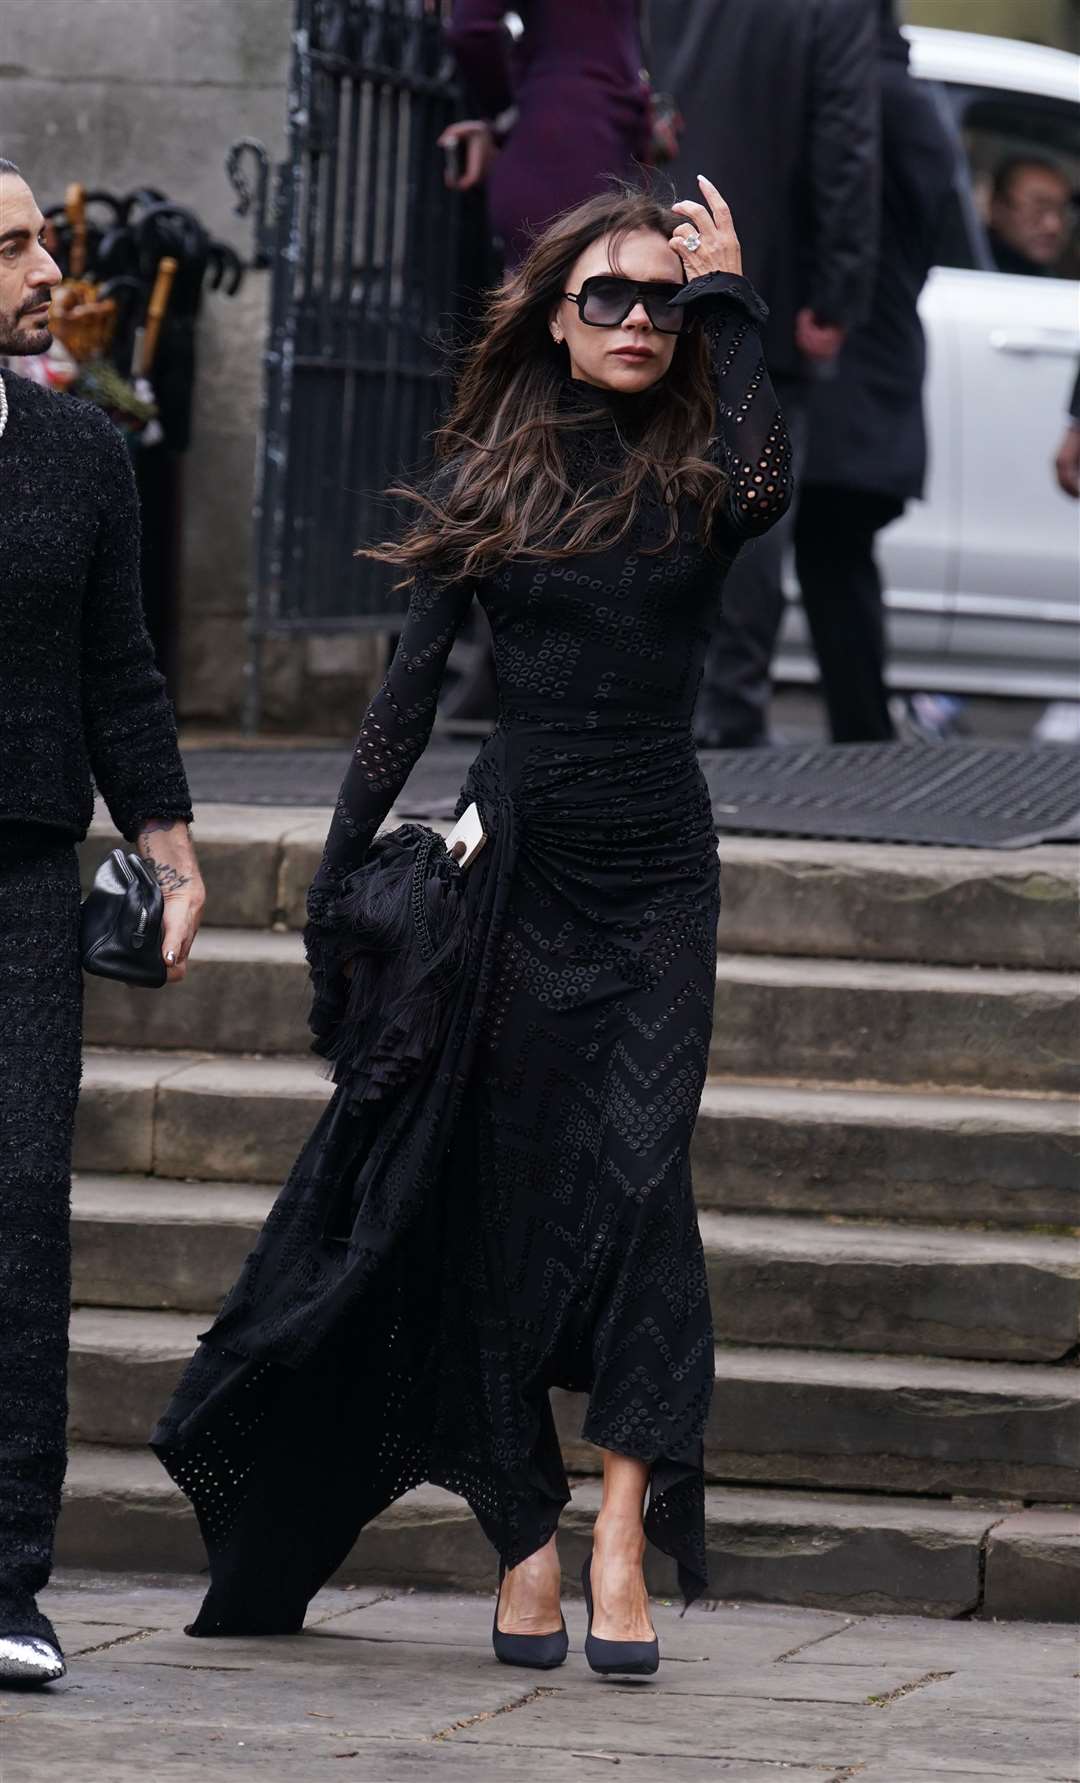 Victoria Beckham wore a skintight black dress for the memorial service (Yui Mok/PA)